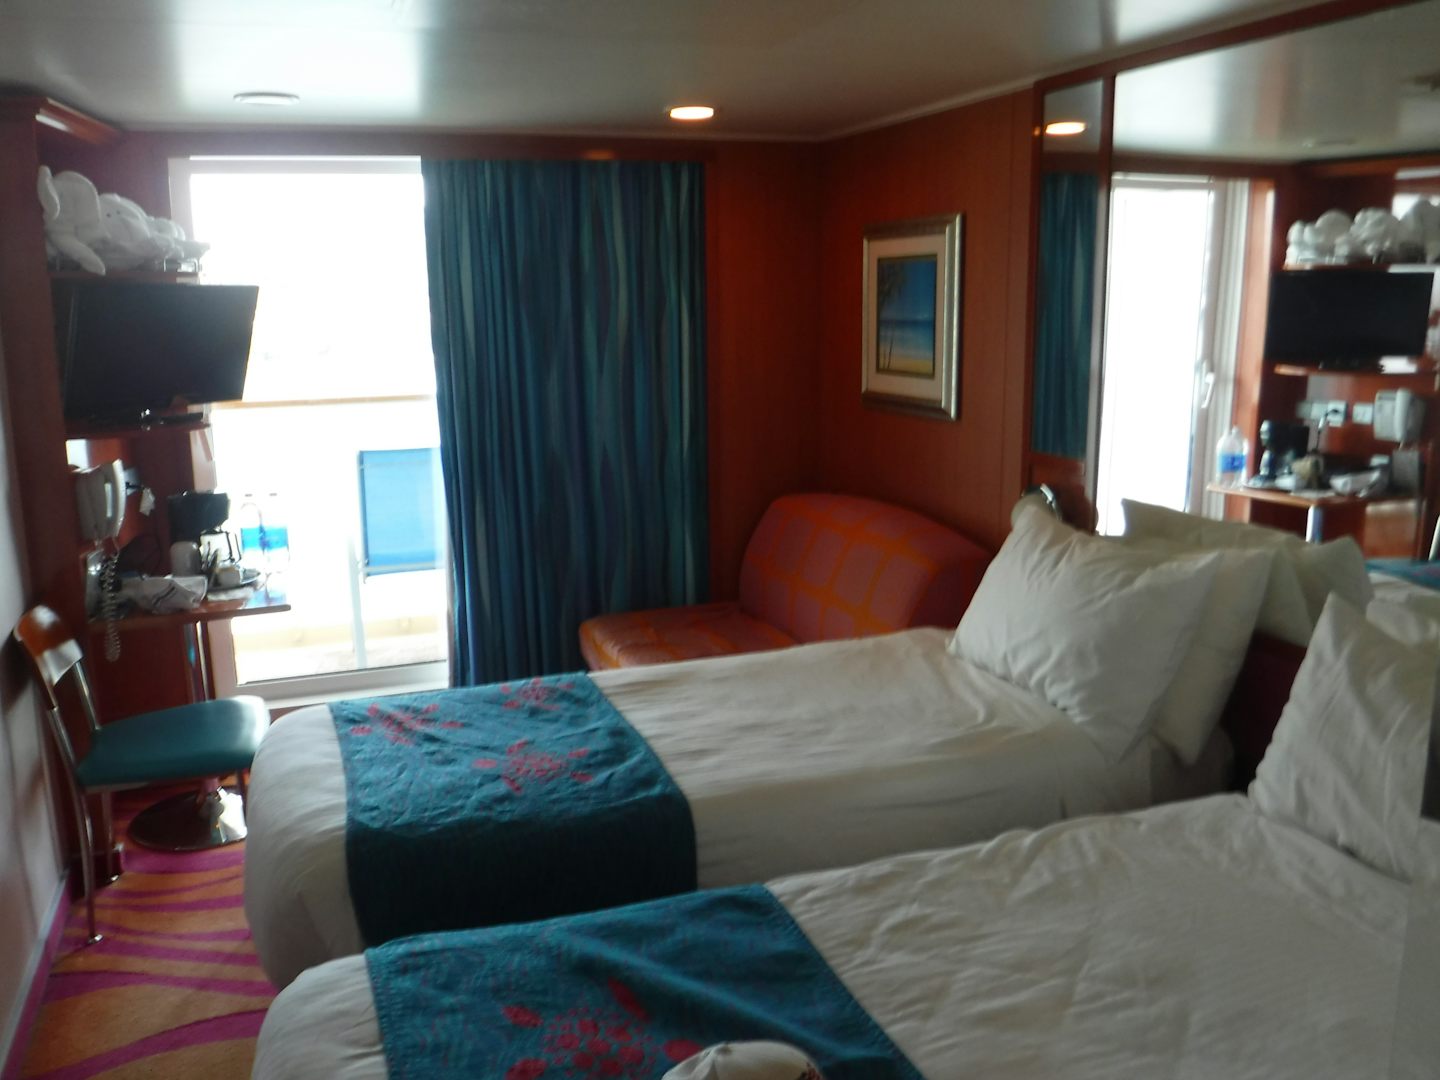 This was out balcony cabin.  See the small space between the beds and the w